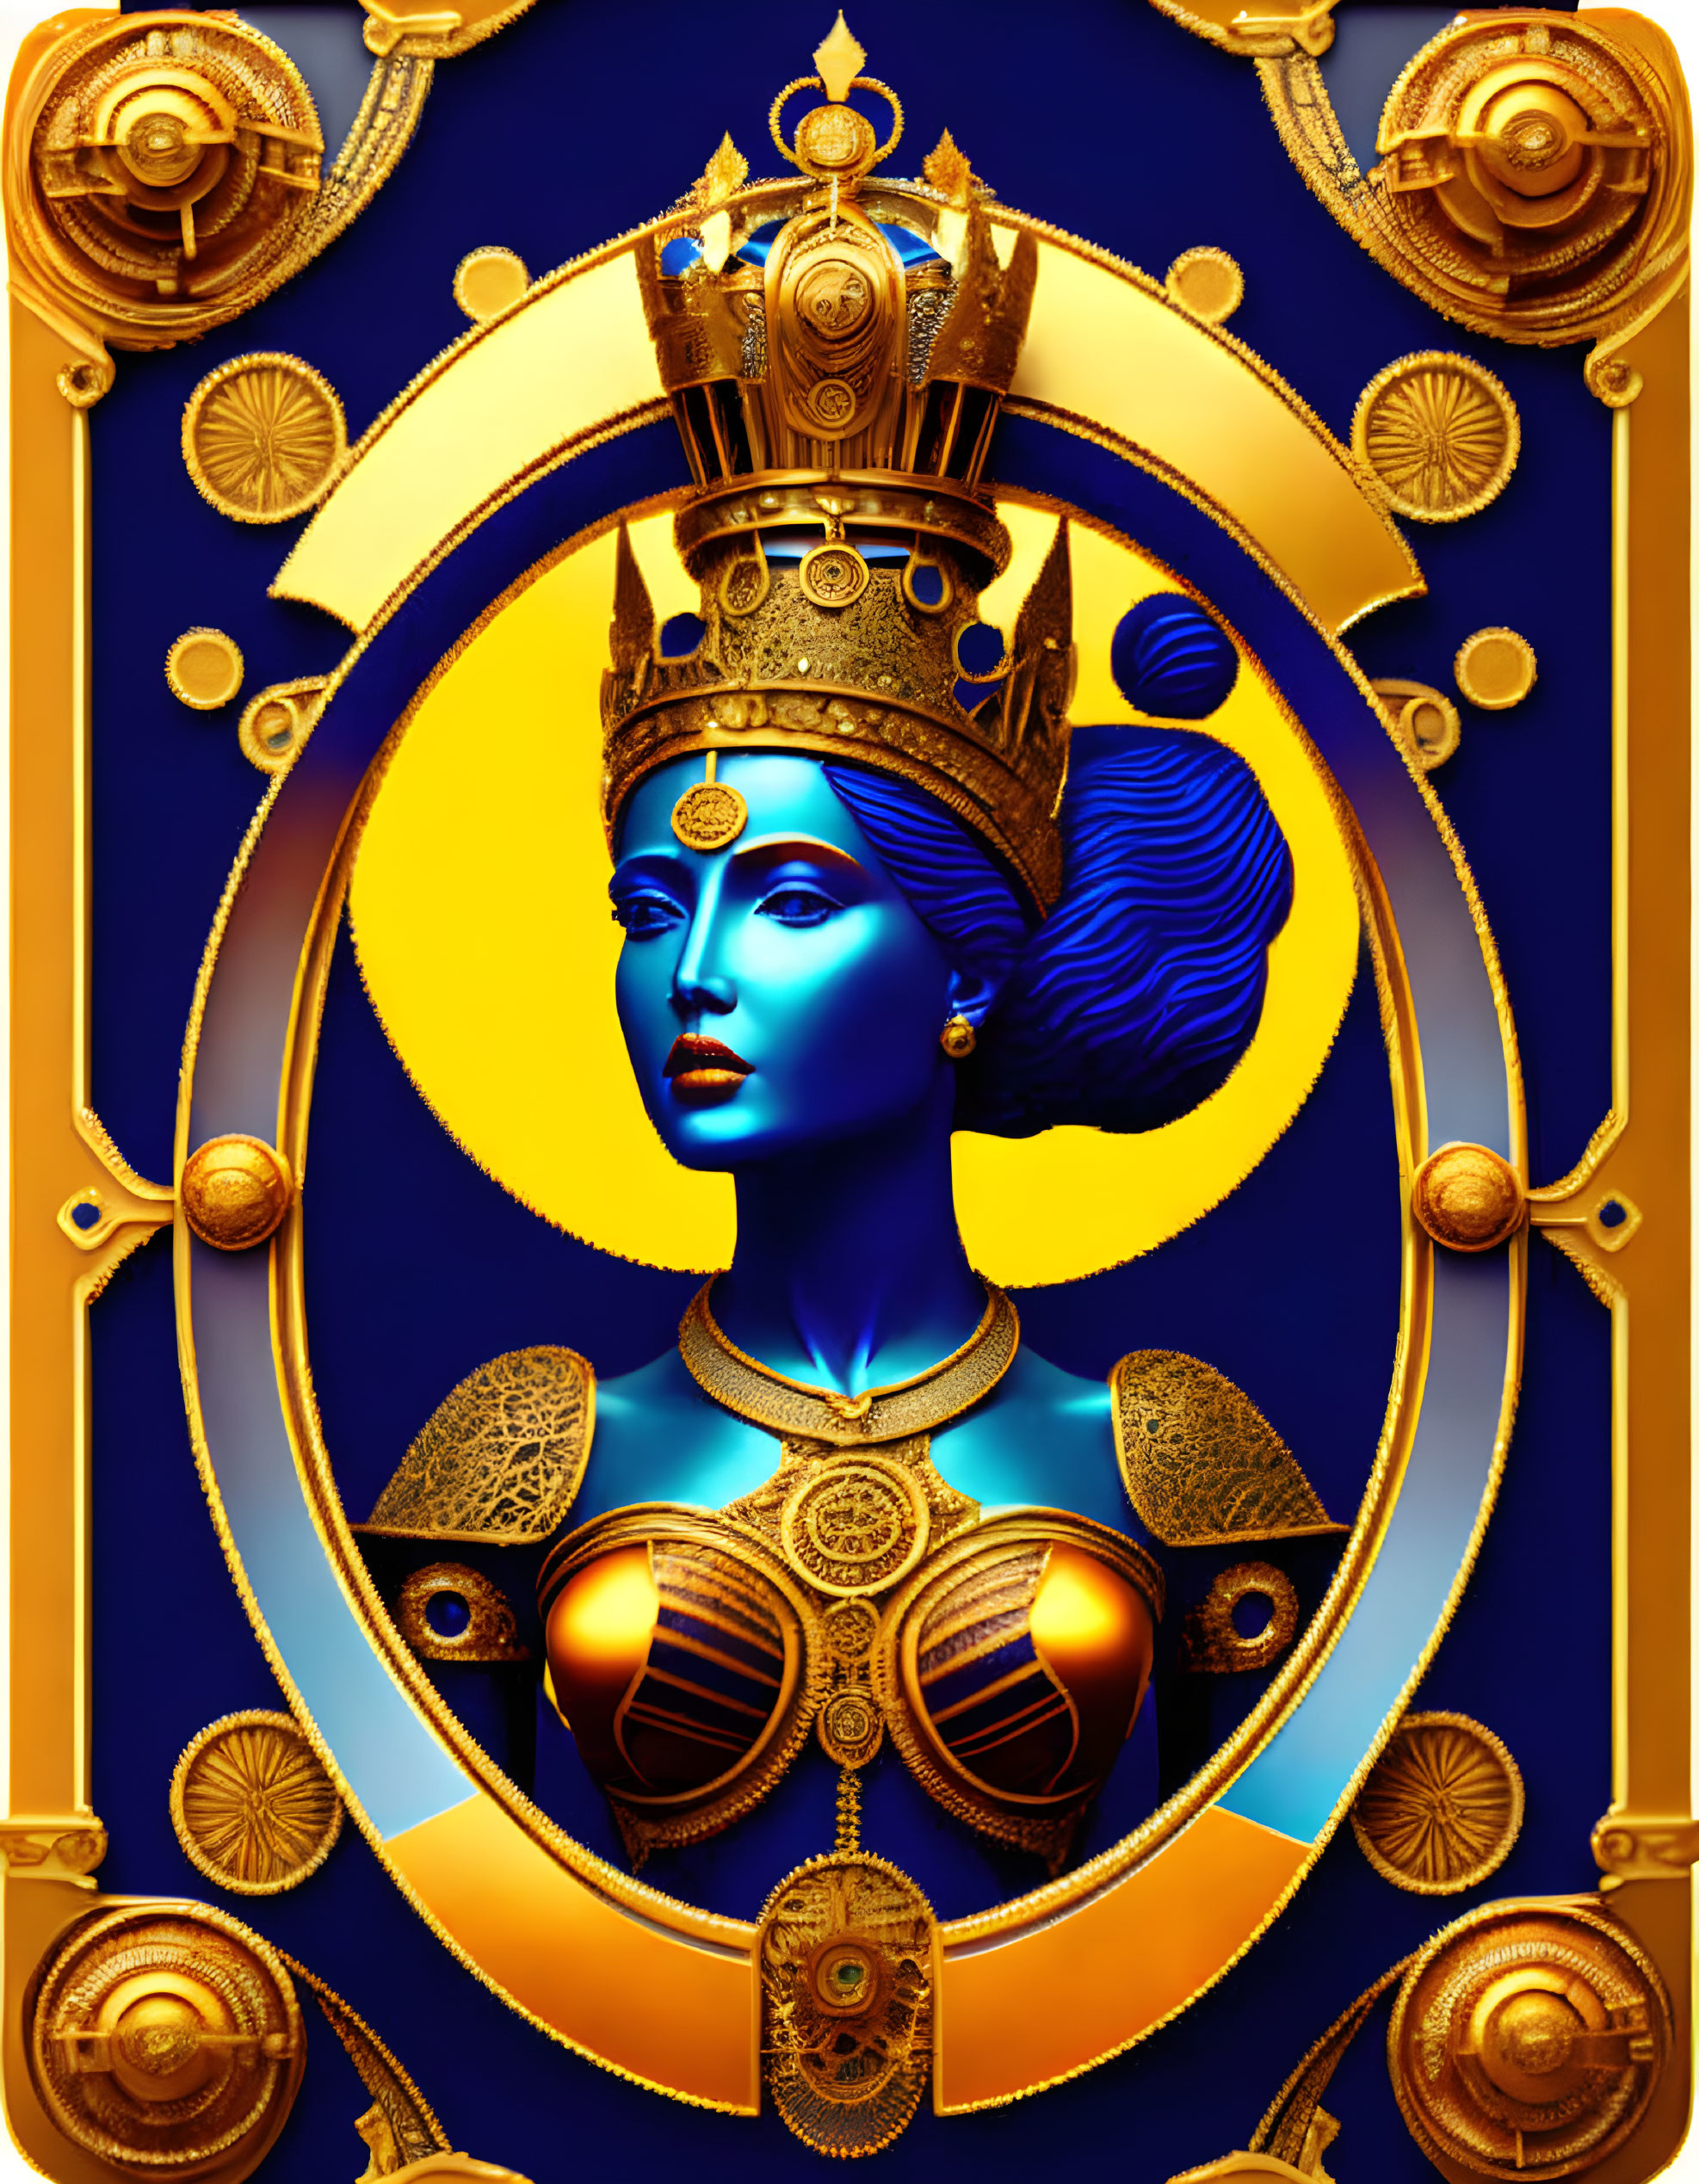 Blue-skinned crowned figure with golden jewelry in digital portrait